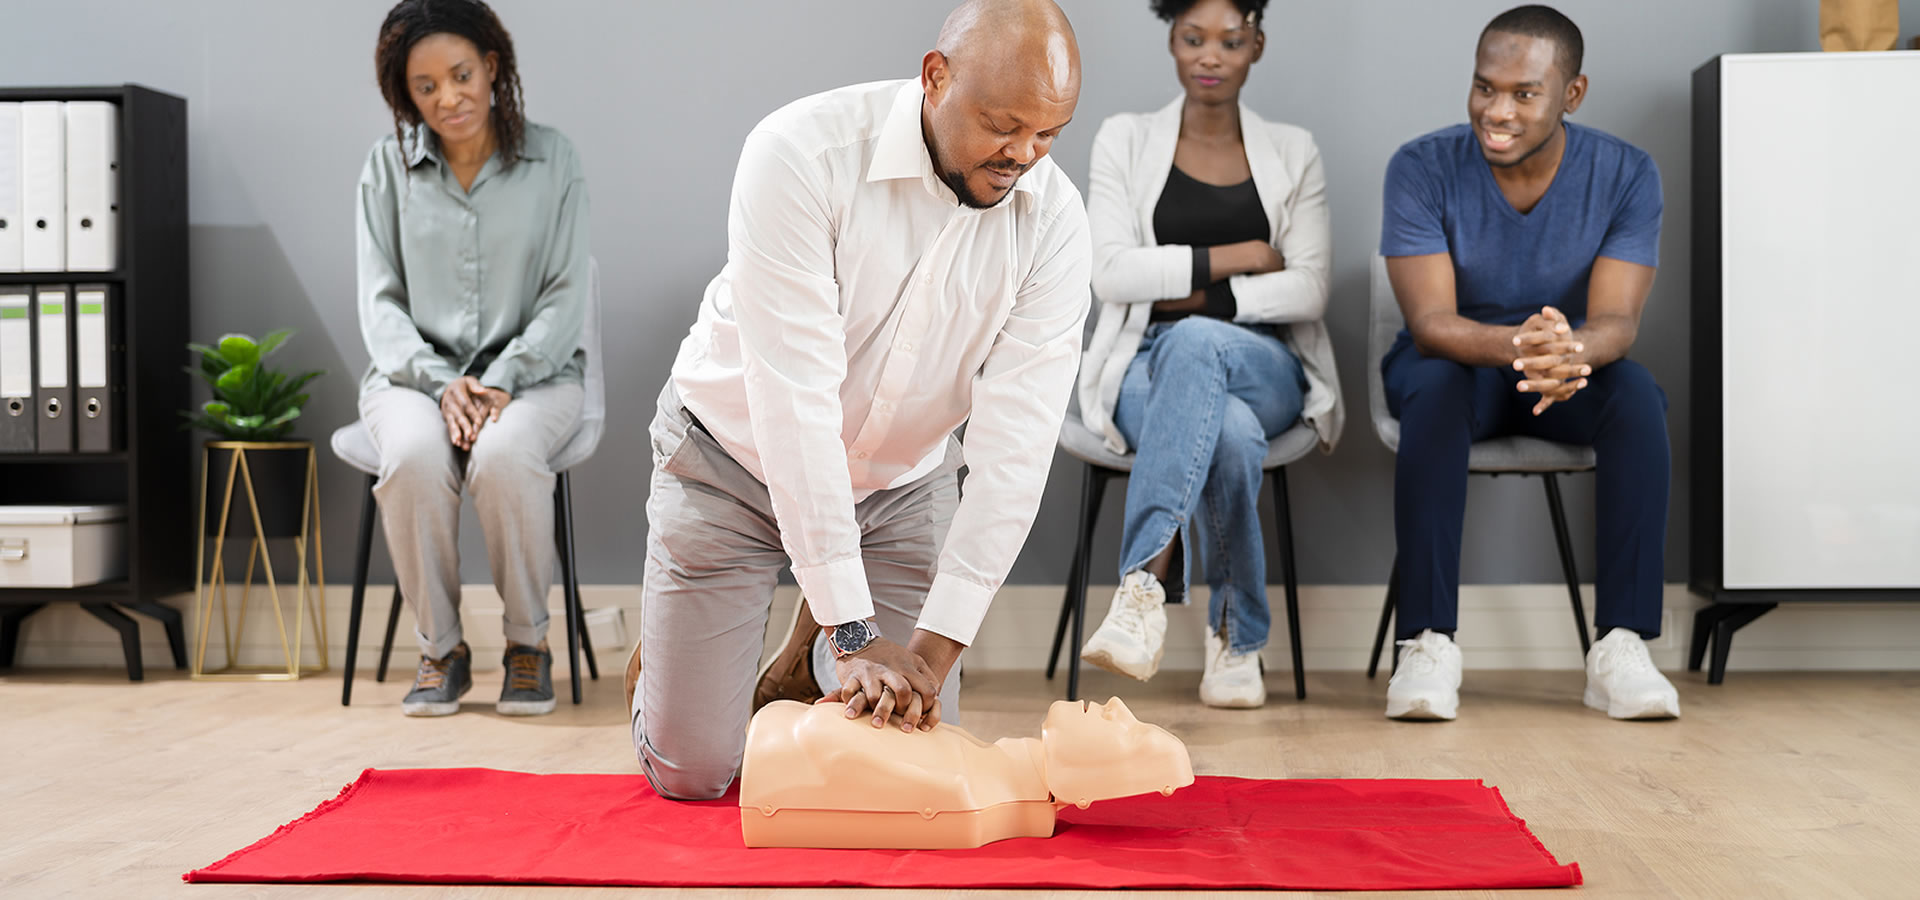 Why is First Aid Training Important?